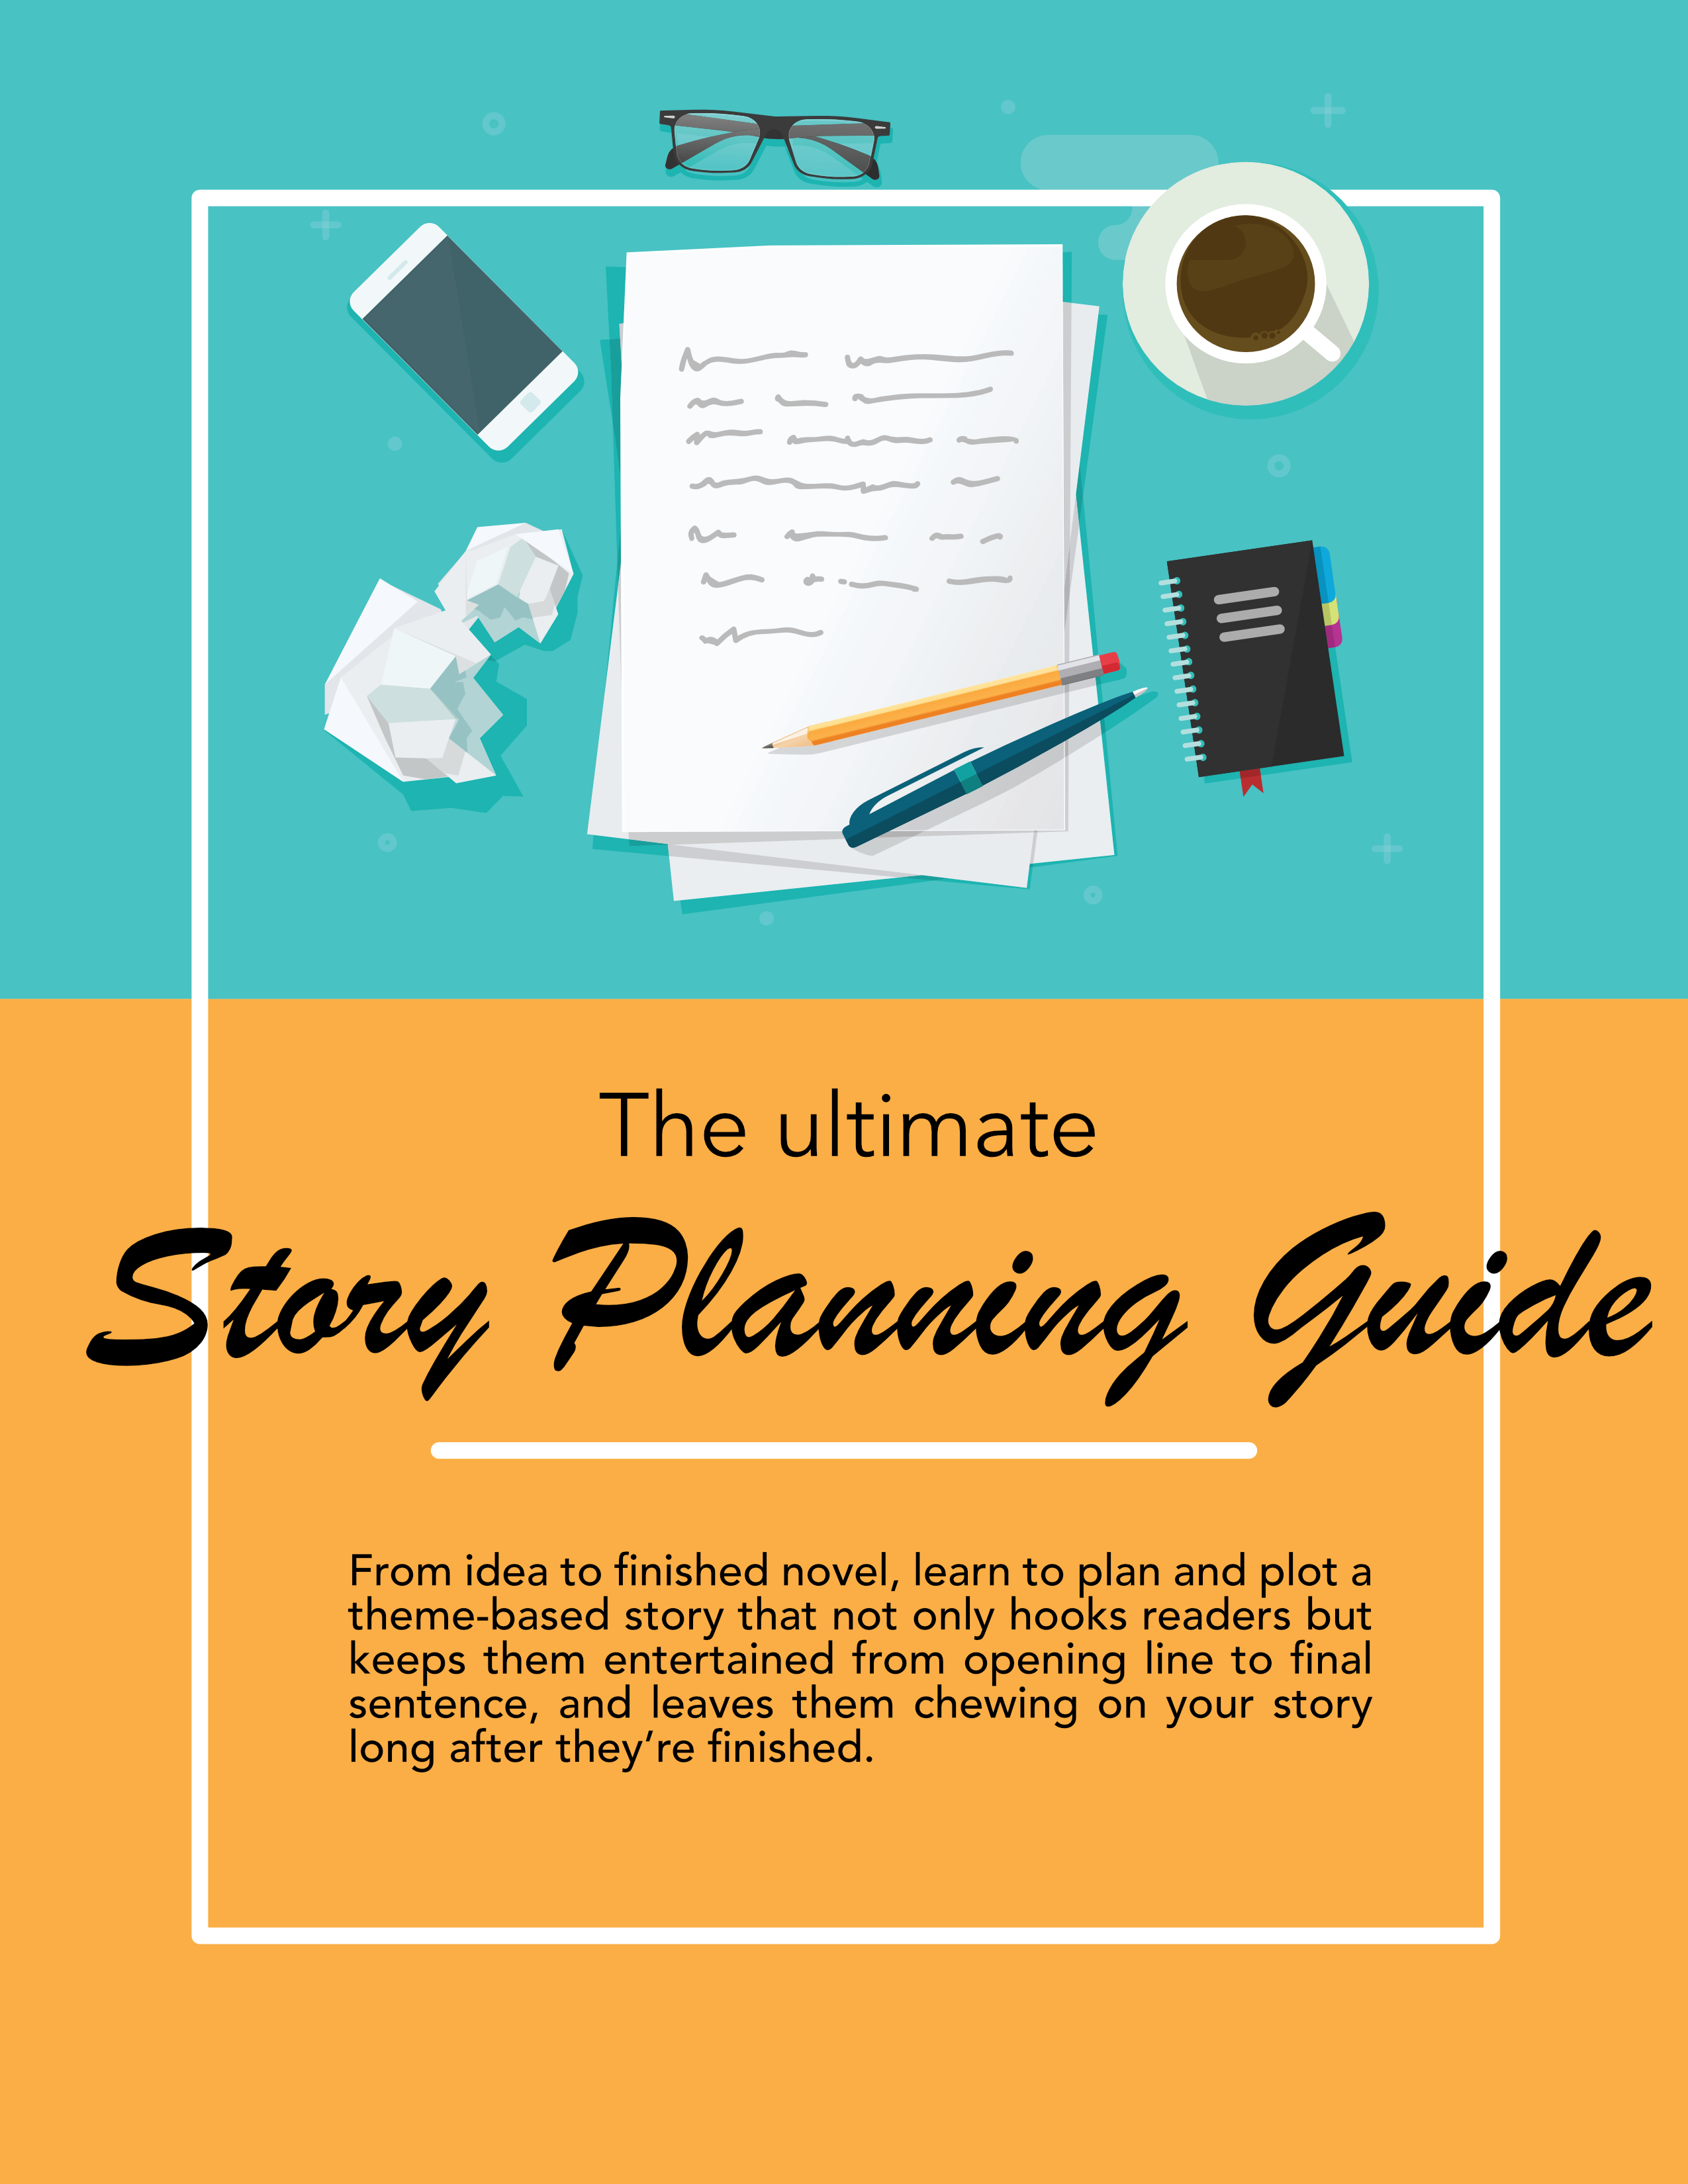 Story Planning Guide